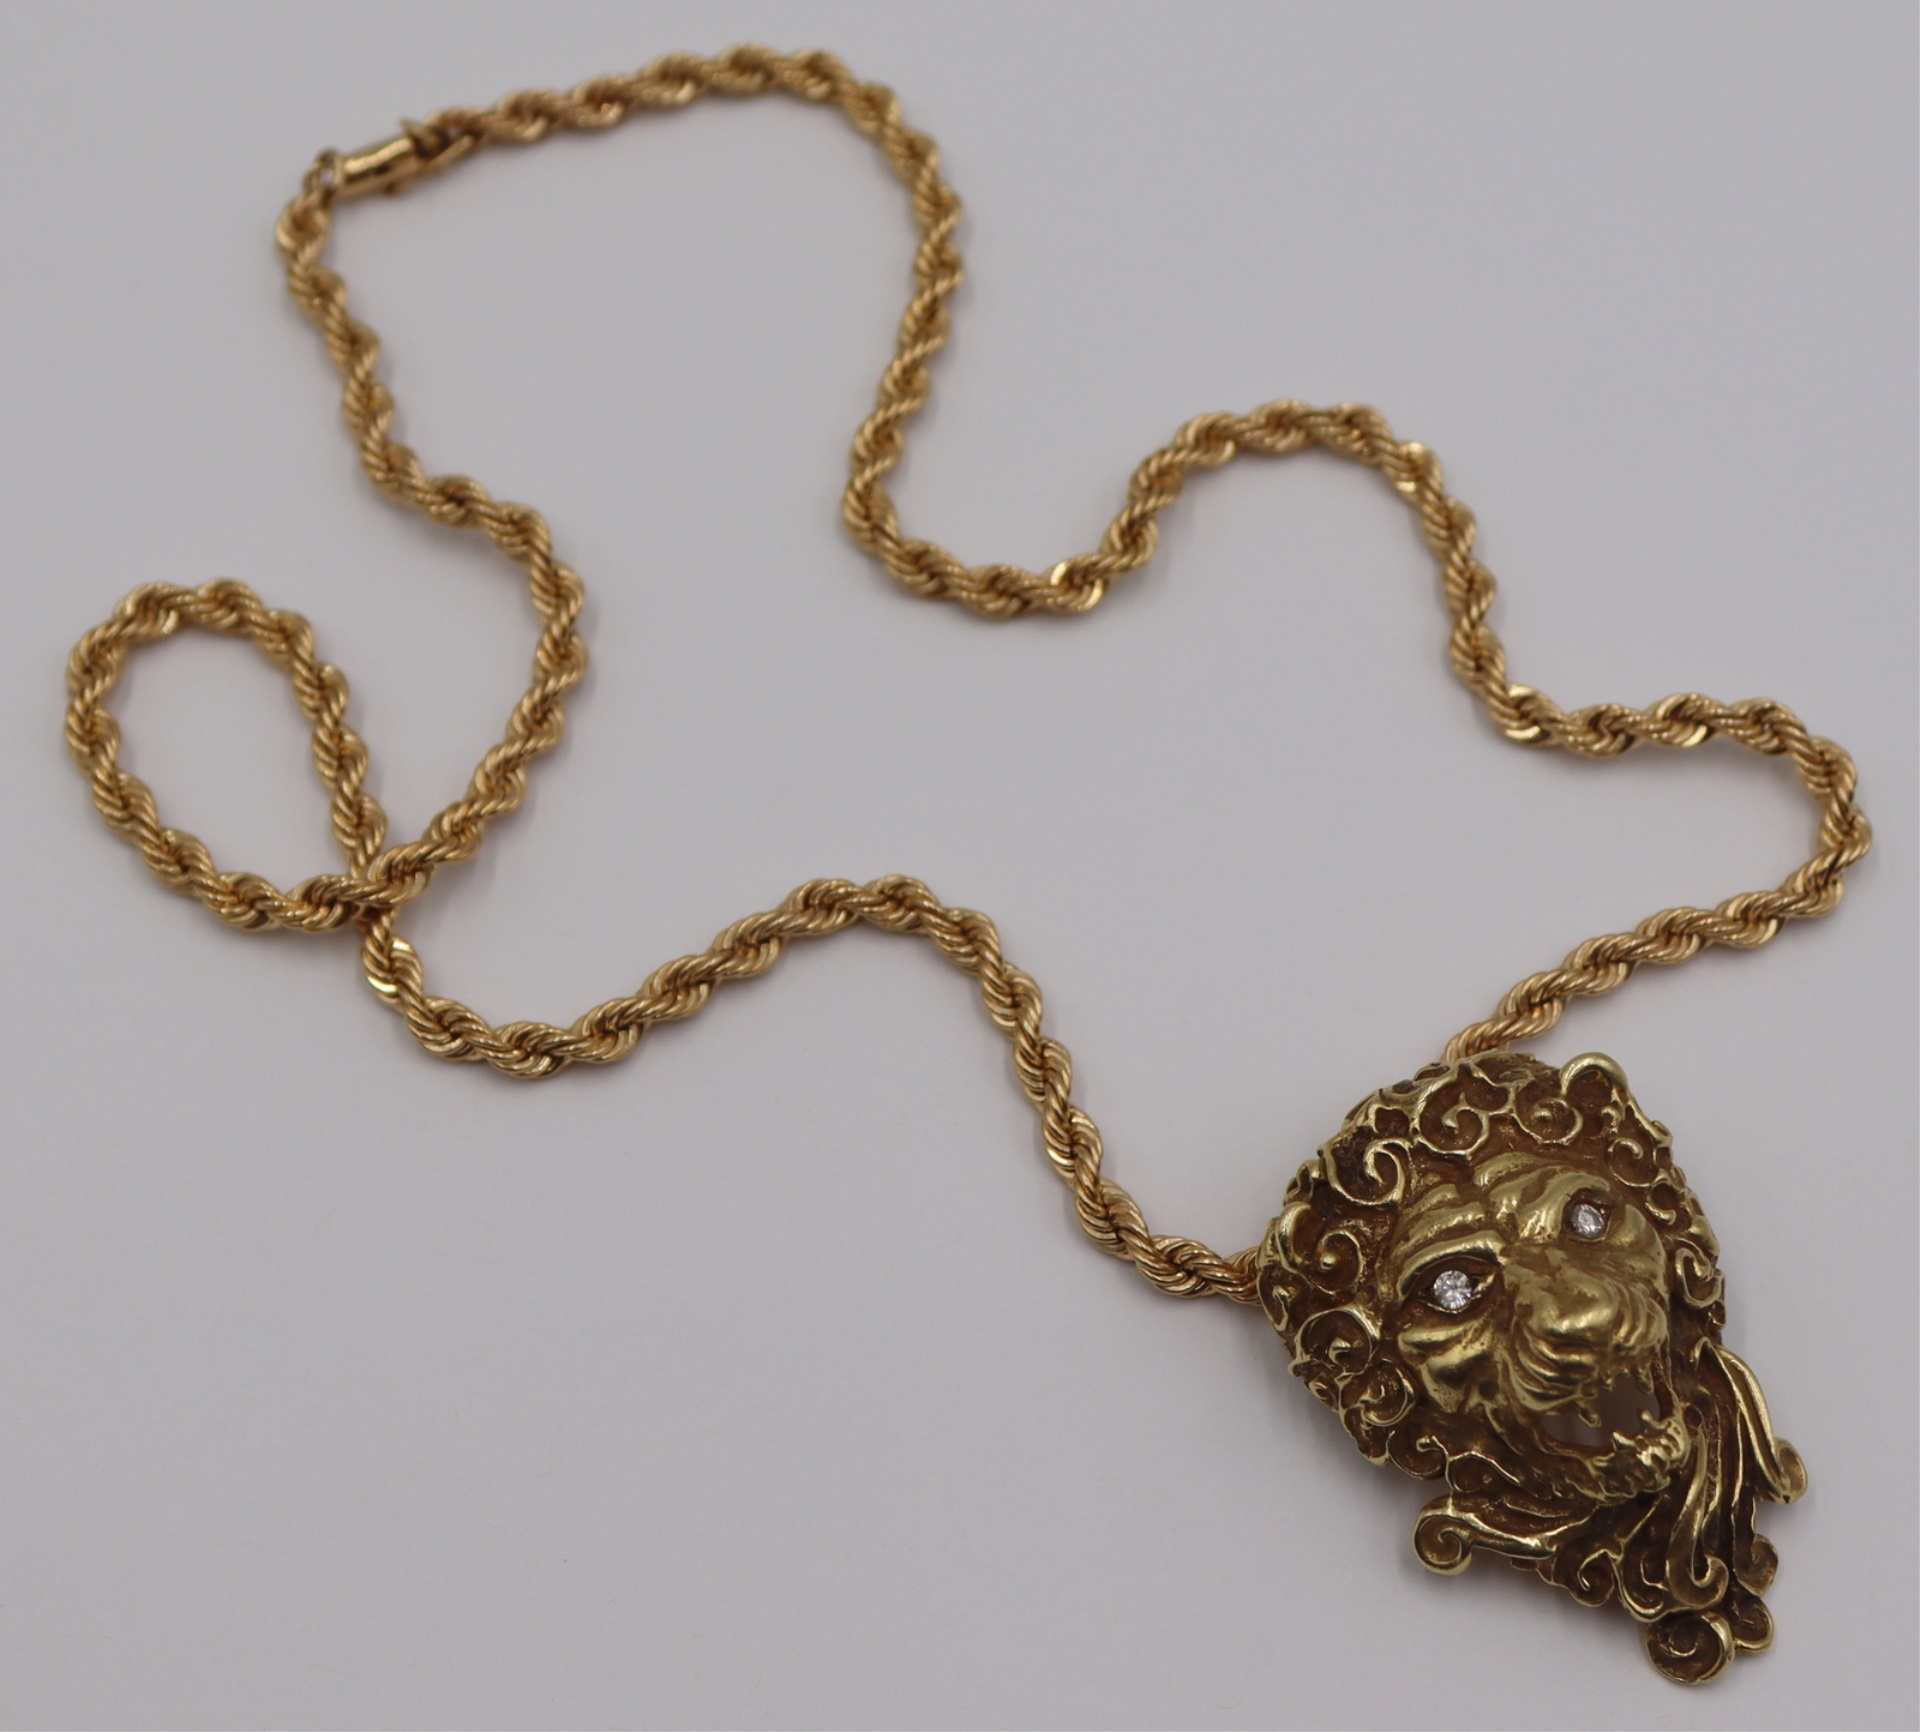 JEWELRY SIGNED 18KT GOLD LION 3be516